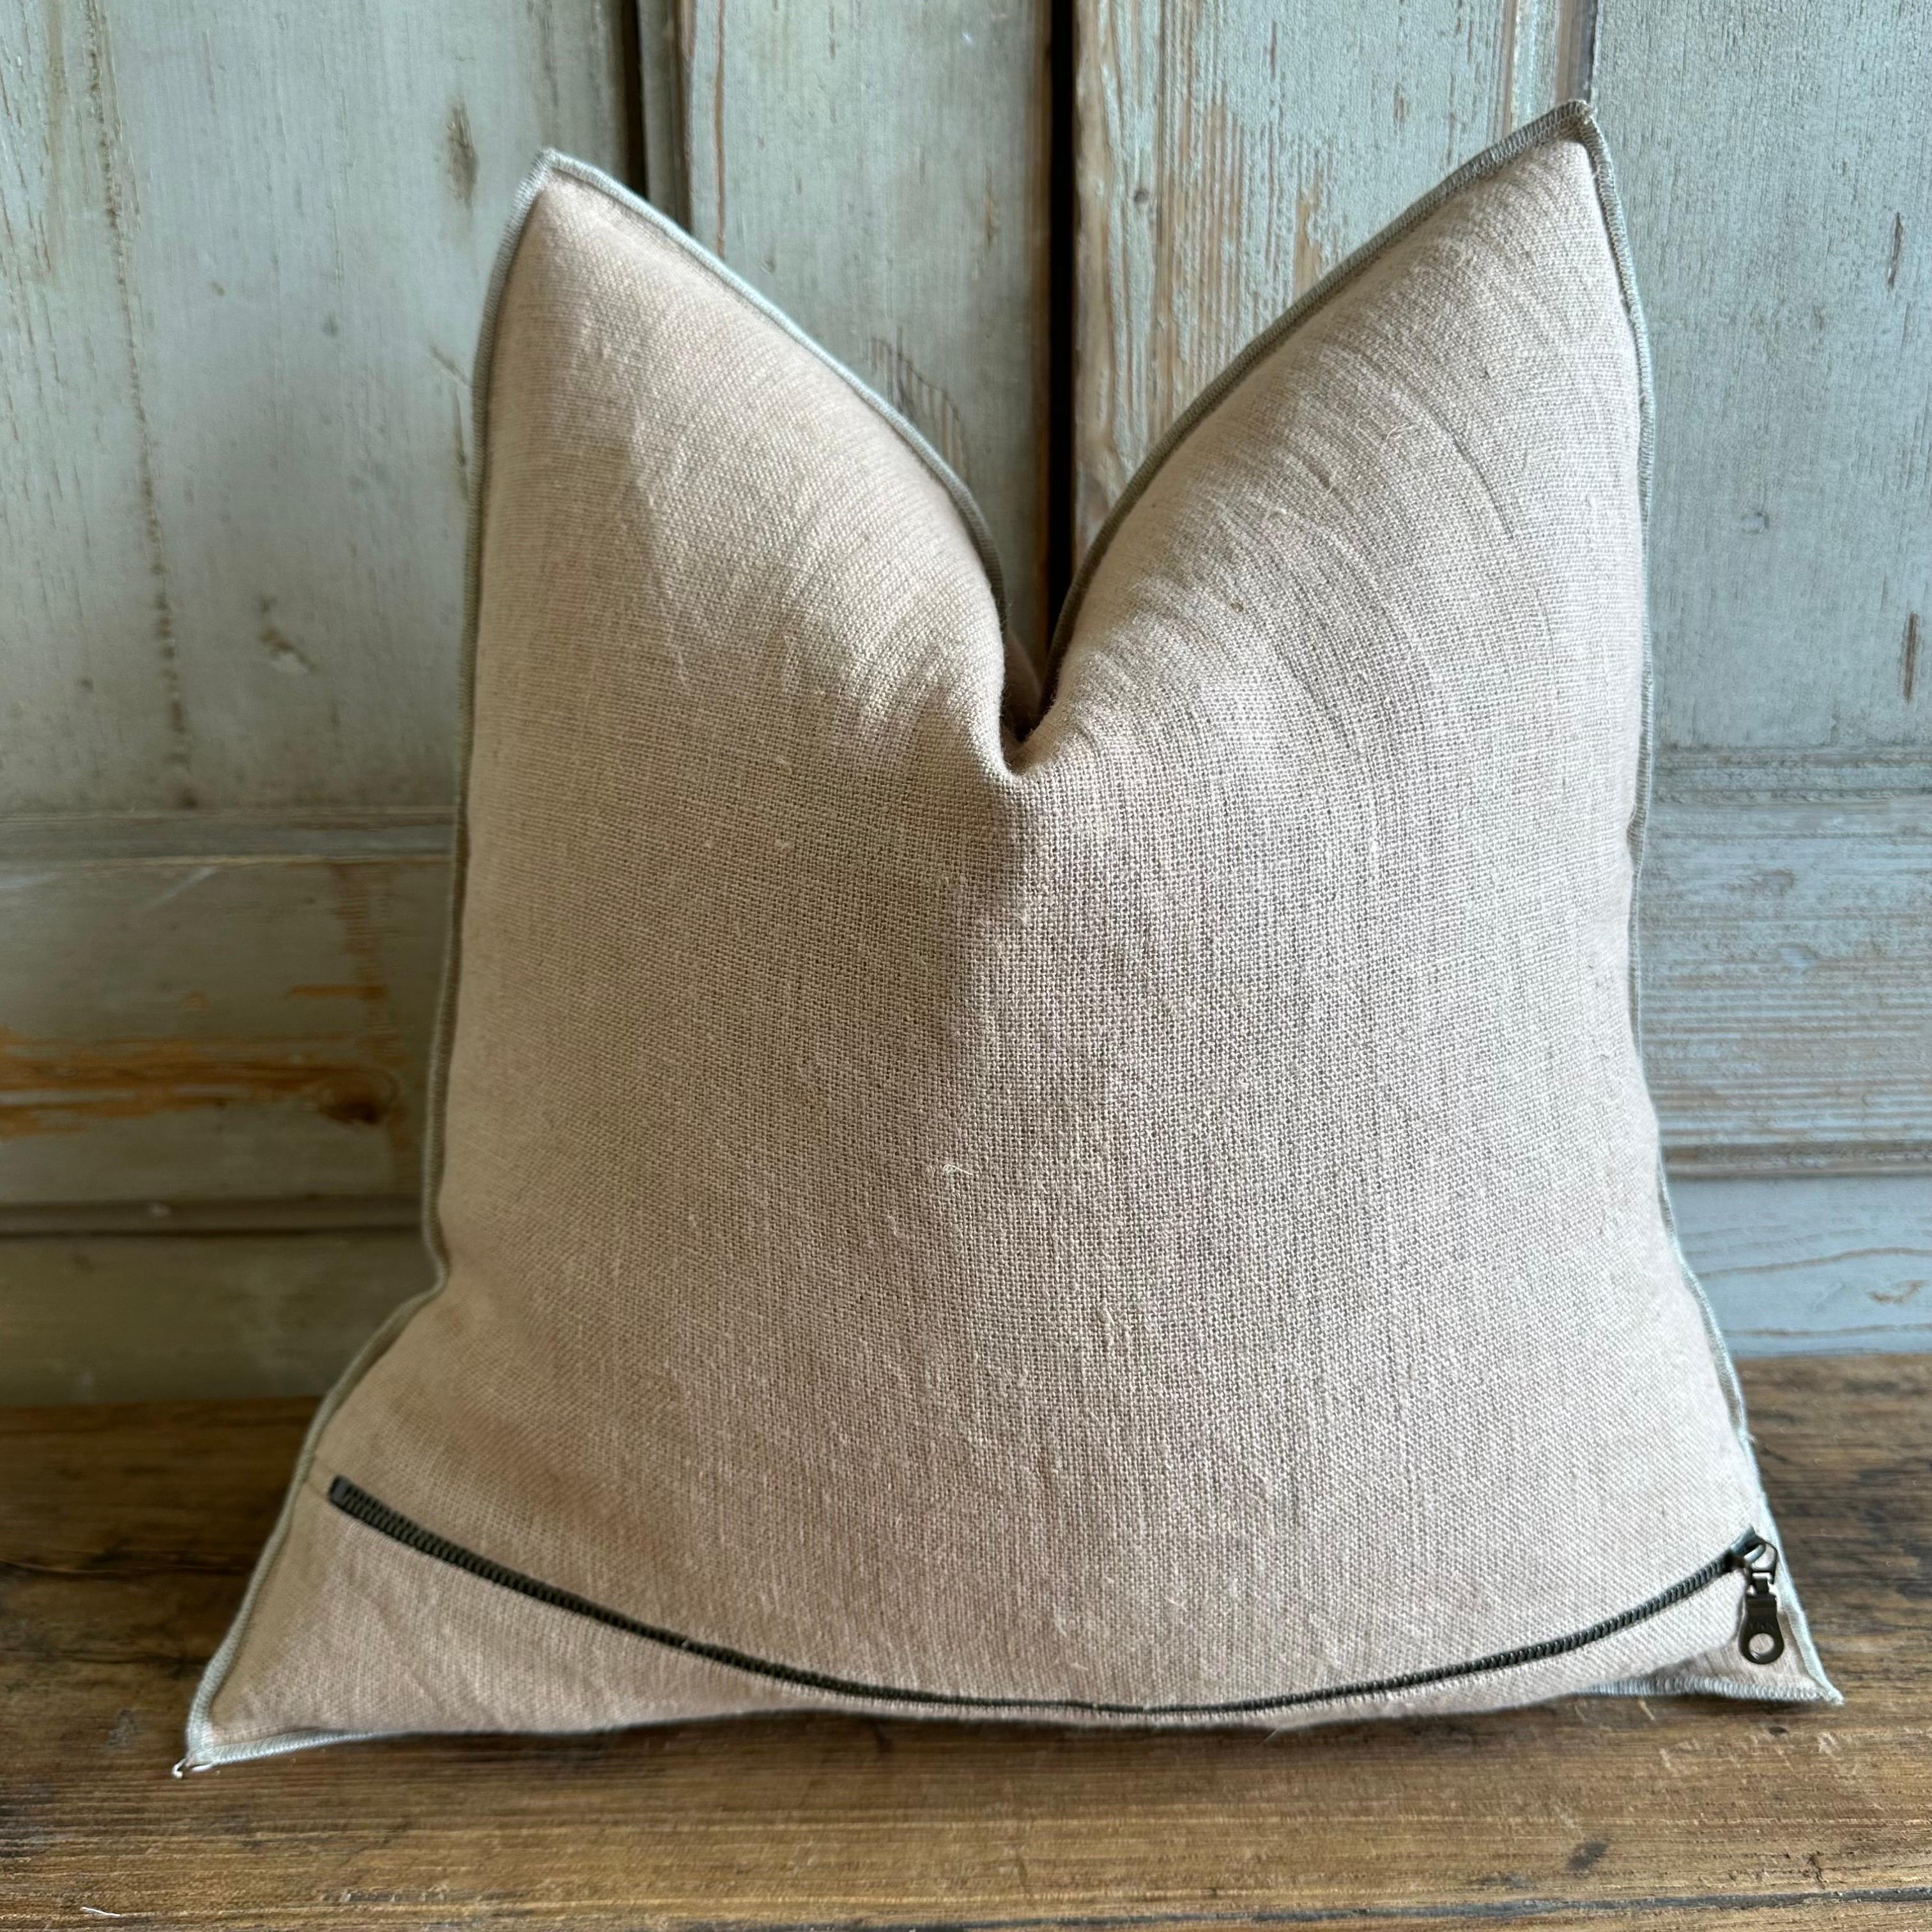 A beautiful 100% linen pillow with decorative stitched edge. 
Zipper closure, 90/10 down feather pillow is included.
Size: 18x18
Color: cimarron; a sofa pale nude brown with a subtle pink hue
Composition
100% linen, natural finish, european